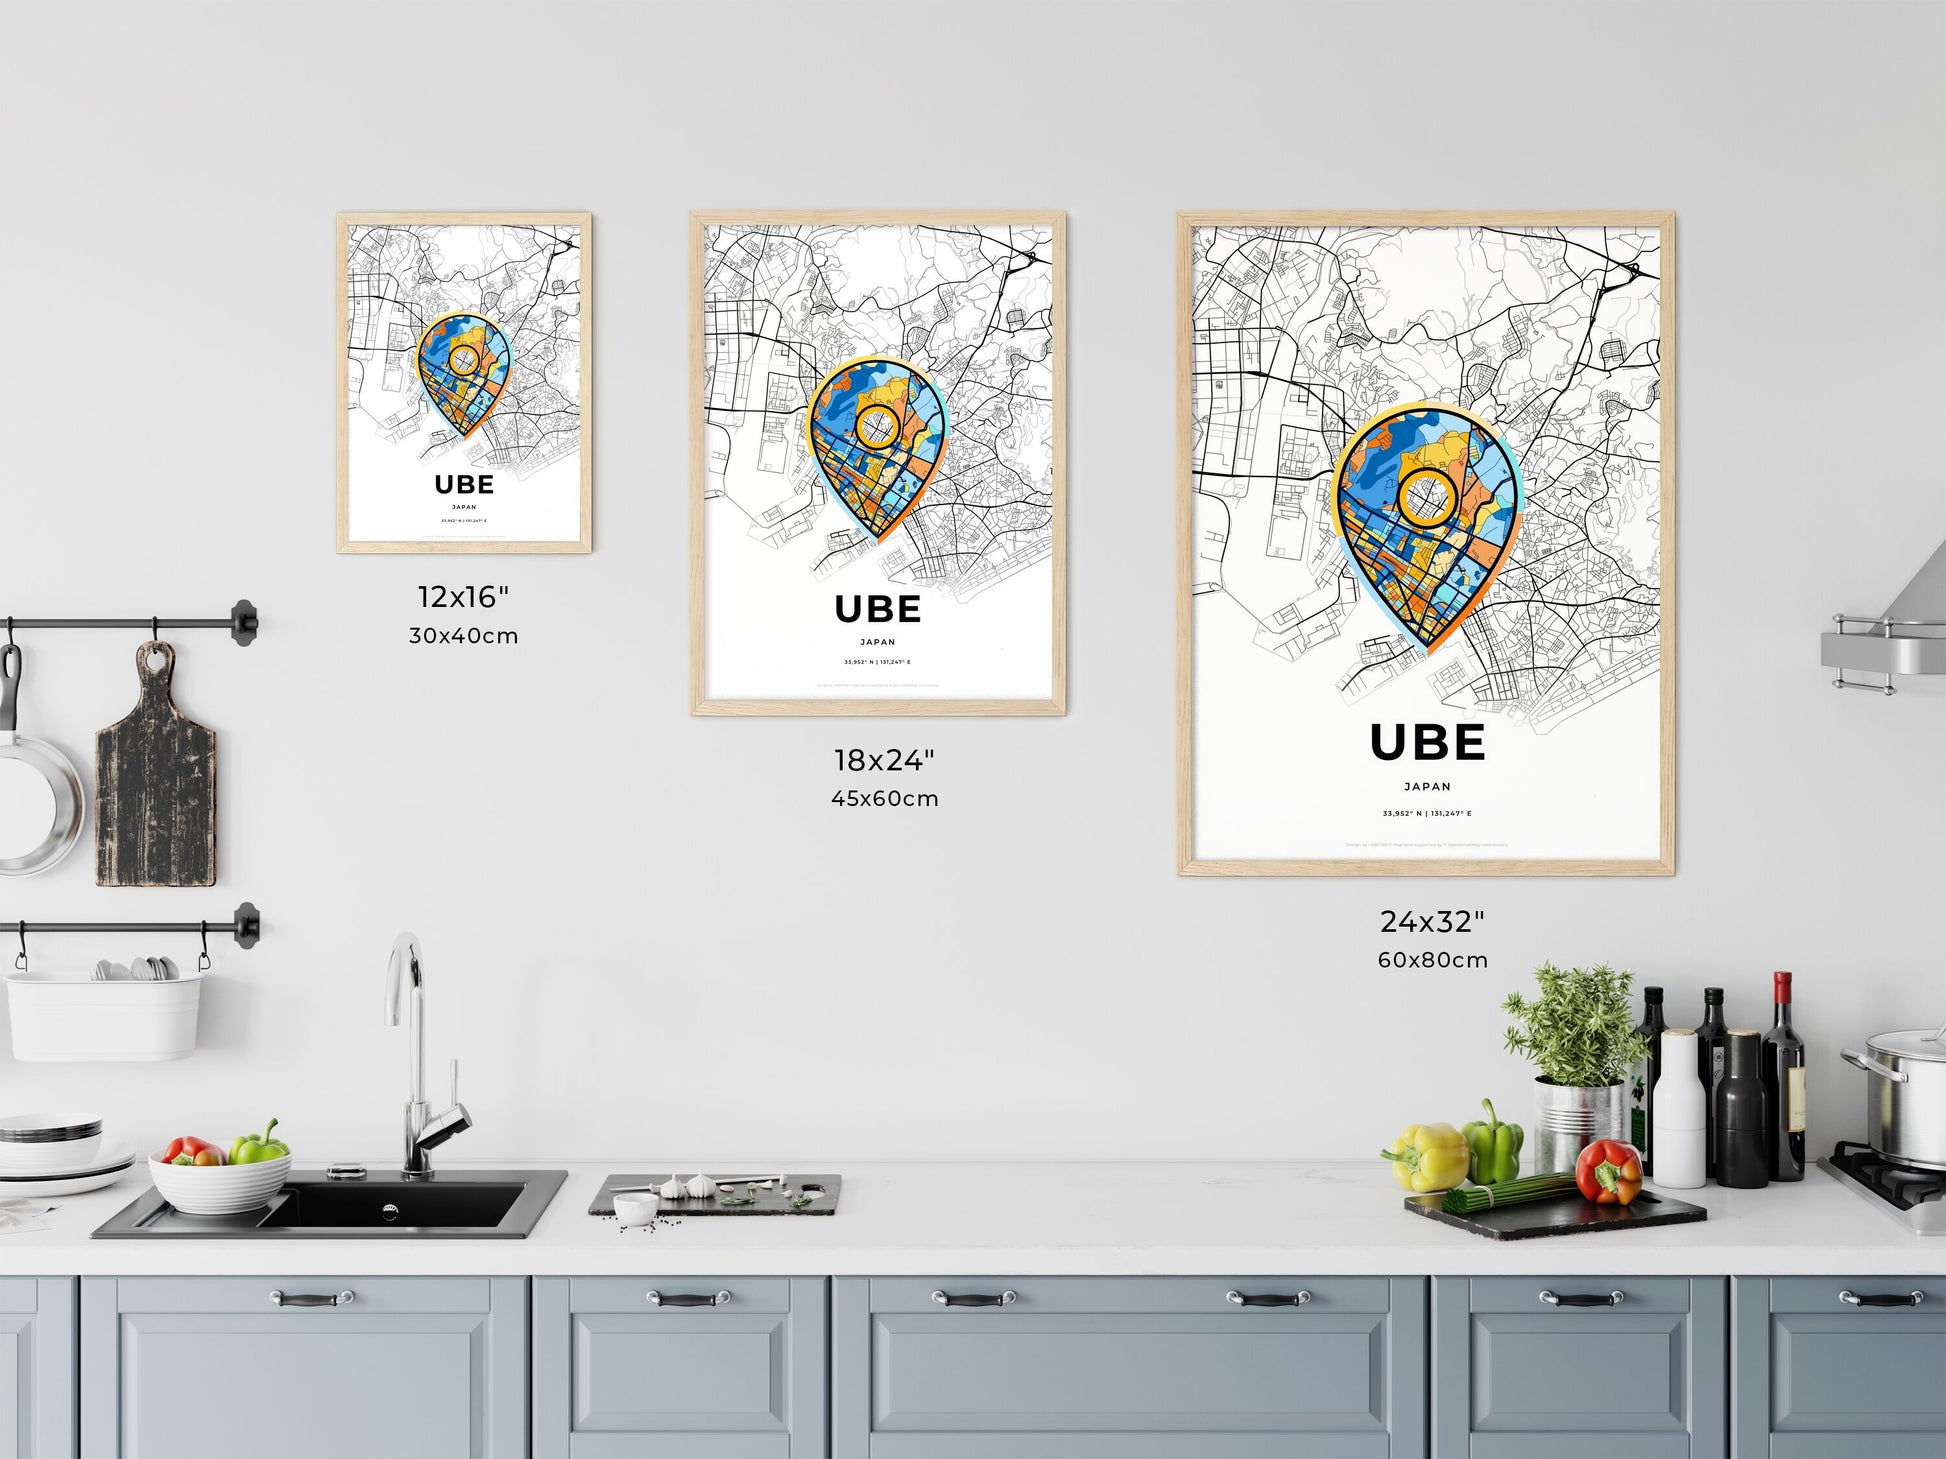 UBE JAPAN minimal art map with a colorful icon. Where it all began, Couple map gift.